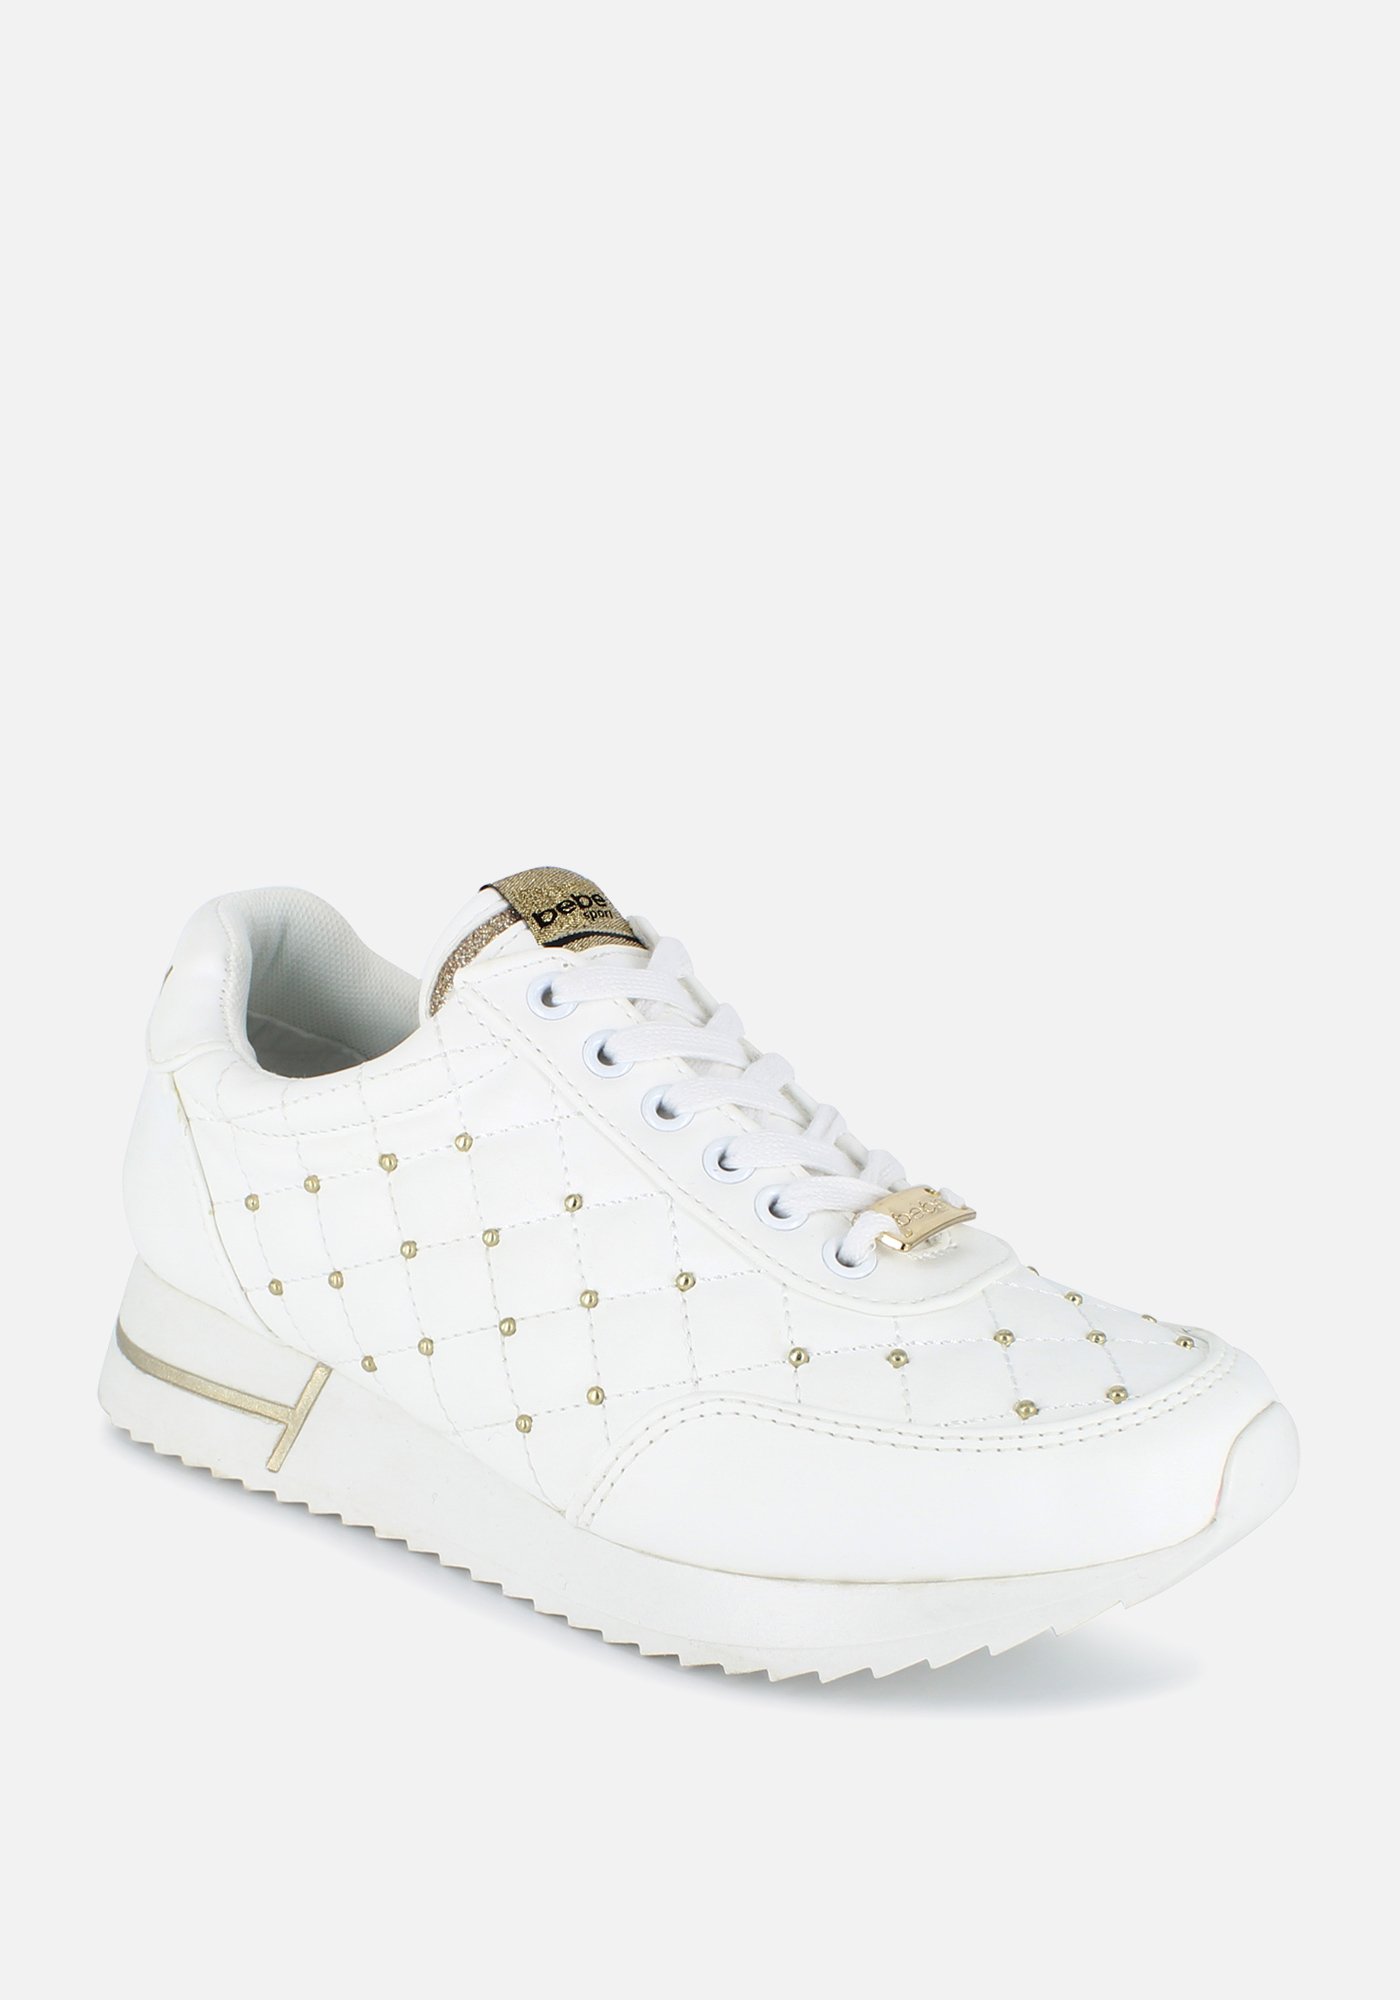 Bebe Women's Barkley Quilted Sneakers, Size 10 in White Synthetic